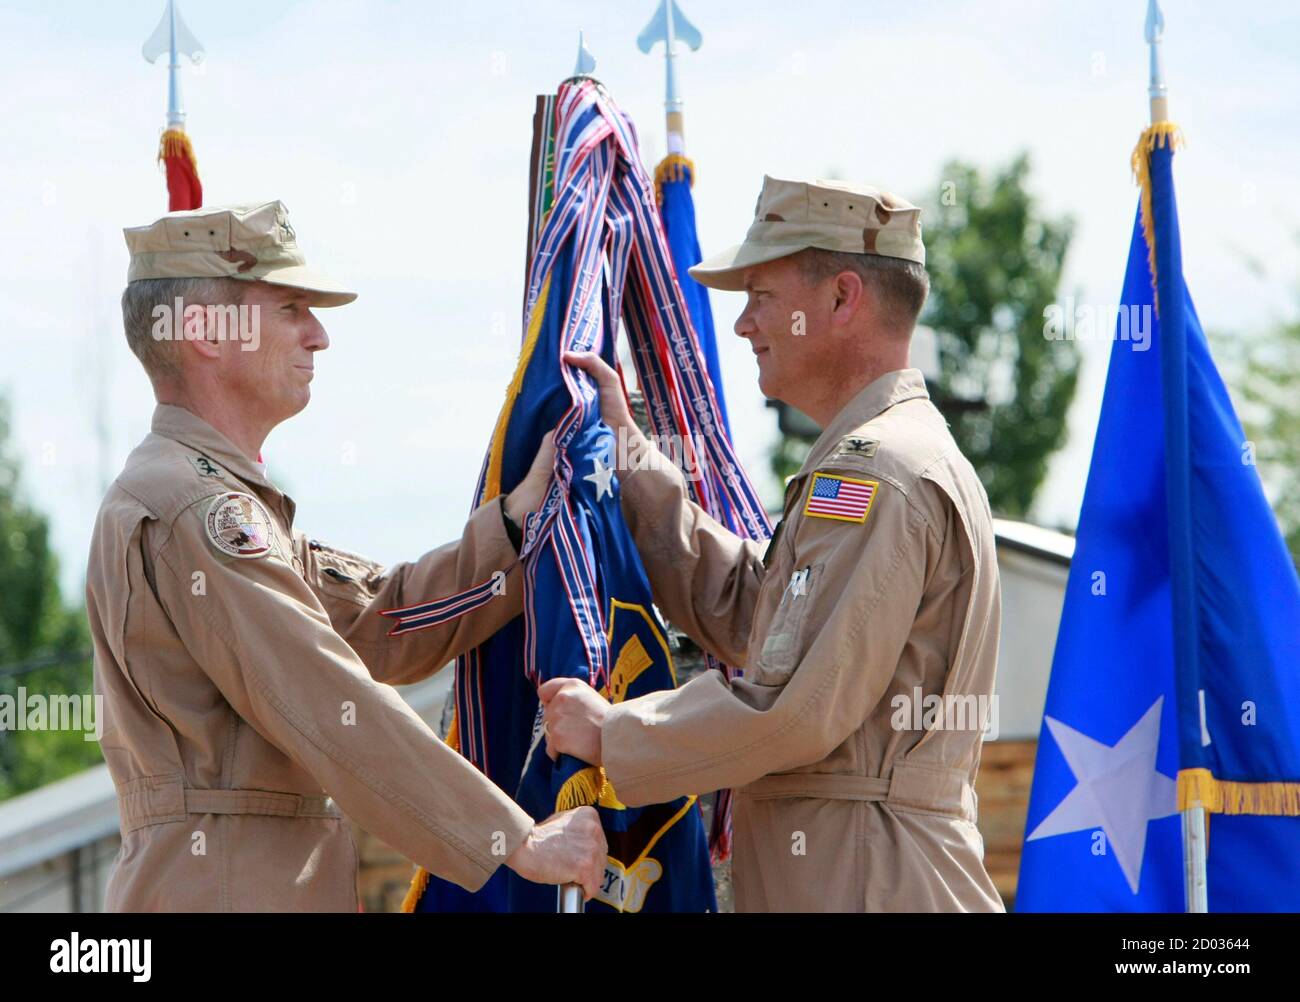 Mike Hostage (L), commander of the U.S. Air Force Central Command, Southwest Asia, and Colonel James Jacobson take part in the change of command ceremony at the U.S. transit center at Manas airport near Bishkek June 14, 2011. Sones relinquished command of the 376th Air Expeditionary Wing to Jacobson on Tuesday. REUTERS/Vladimir Pirogov  (KYRGYZSTAN - Tags: POLITICS MILITARY) Stock Photo